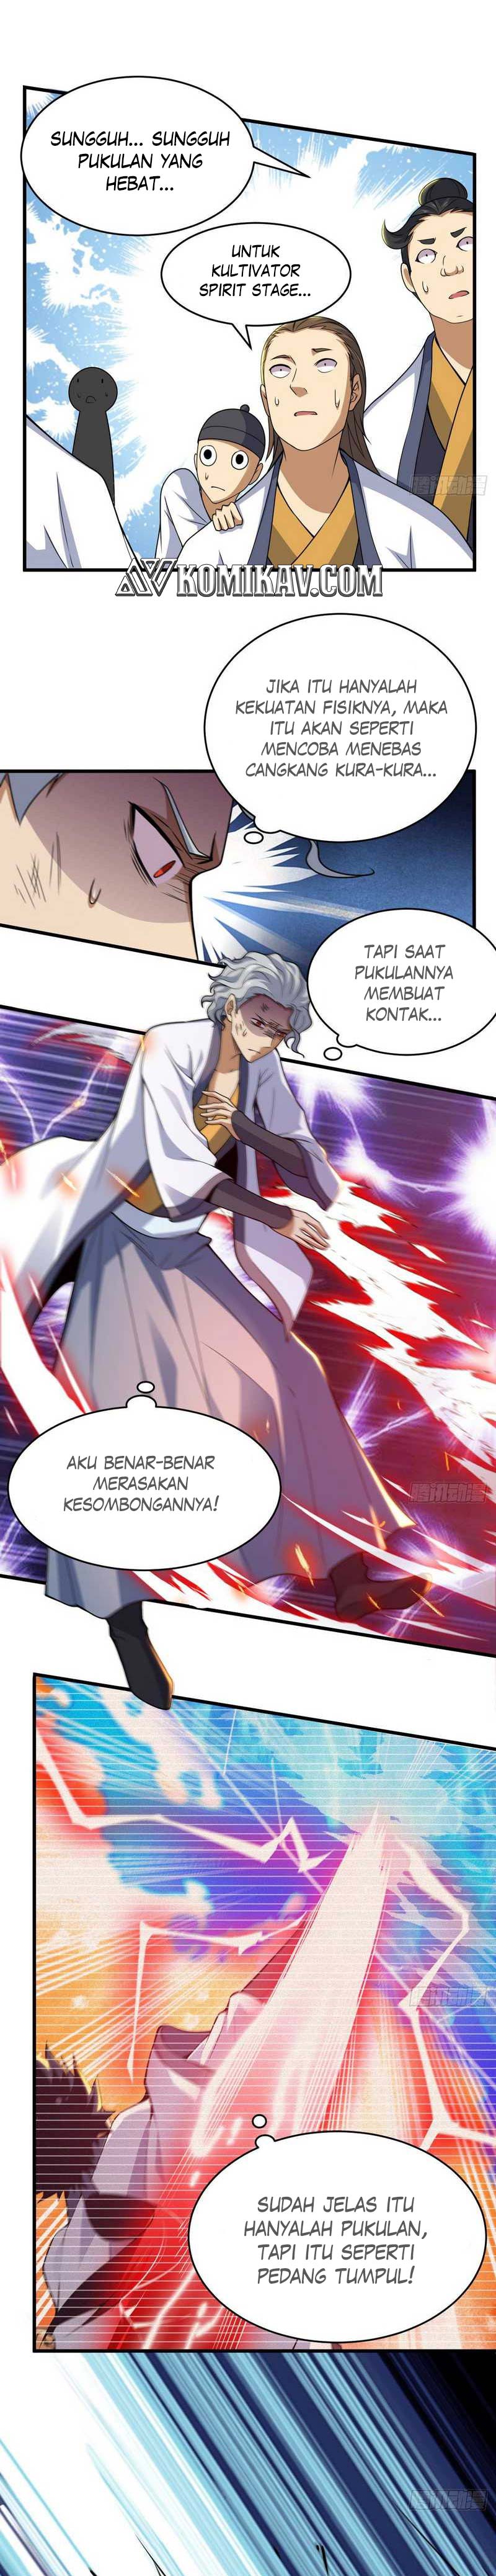 Dilarang COPAS - situs resmi www.mangacanblog.com - Komik i just want to be beaten to death by everyone 085 - chapter 85 86 Indonesia i just want to be beaten to death by everyone 085 - chapter 85 Terbaru 3|Baca Manga Komik Indonesia|Mangacan